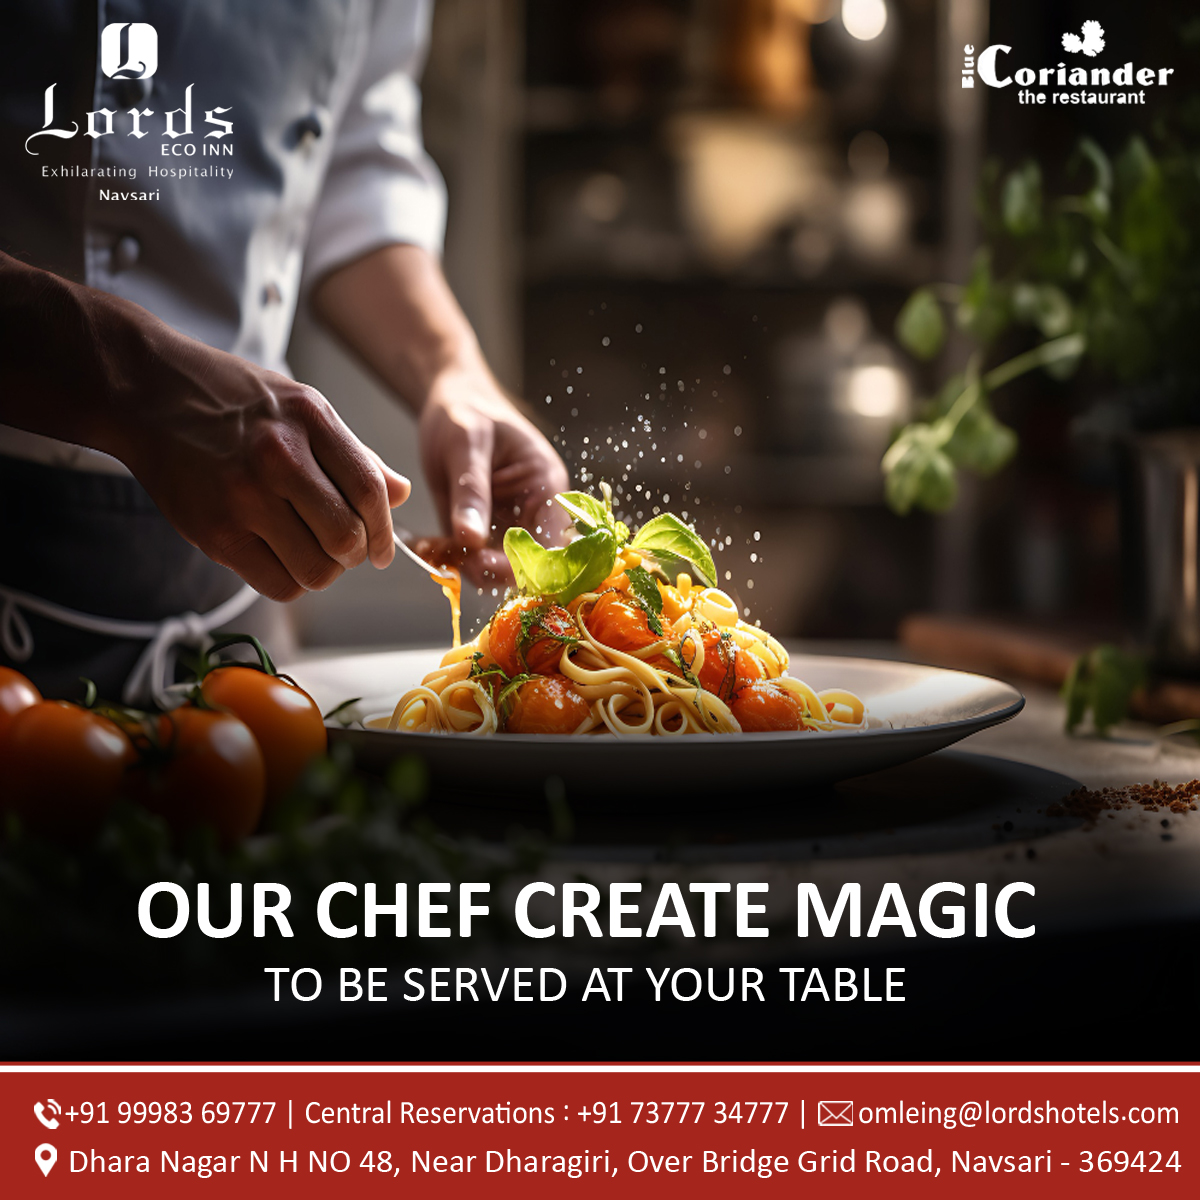 Our chef create magic  to be served at your table!!

For Booking Call Us : +91 99983 69777 / 76009 97333 / 76009 95222

#navsari #LordsHotels #lordsecoinn_navsari #luxuryhotels #luxuryroomstay #banquethall #indiandishes #chillypaneer #foodlovers